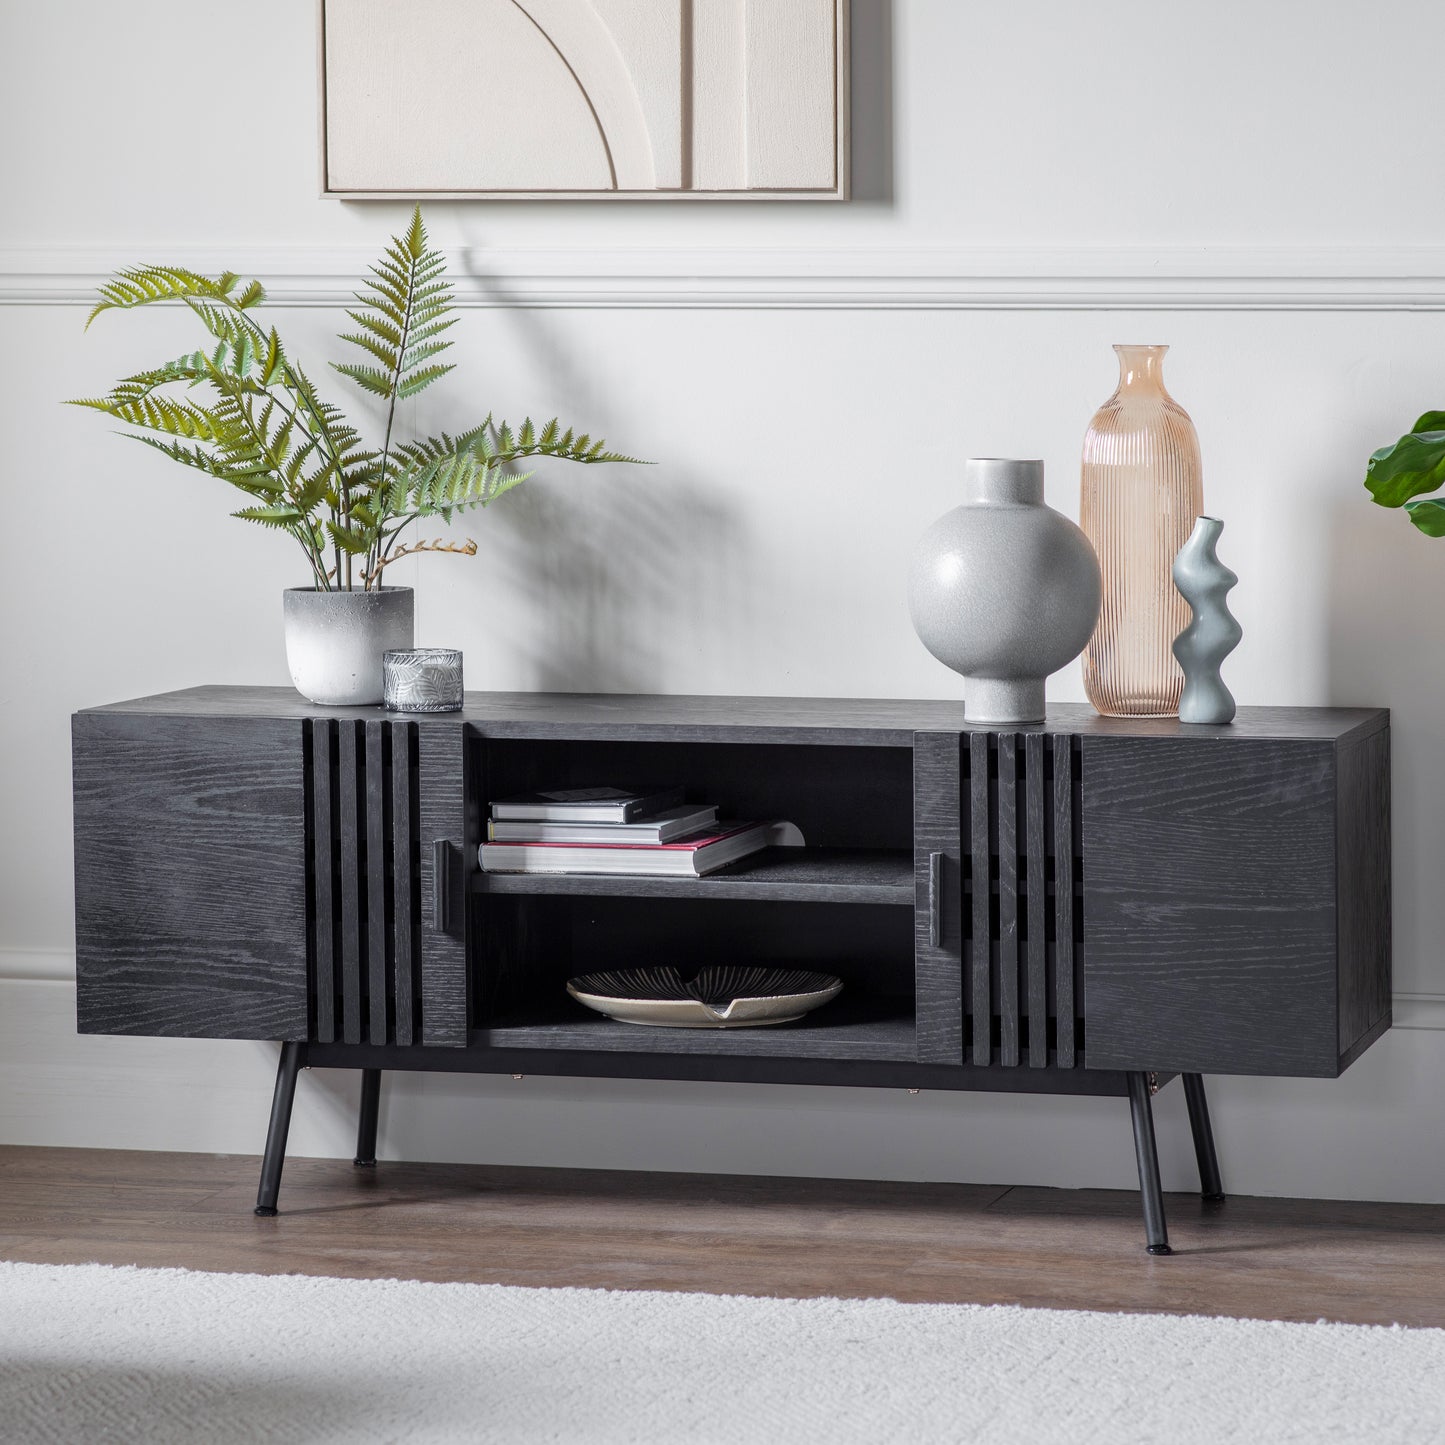 Interior decor and home furniture unite with a Holston Media Unit Black 1400x420x550mm by Kikiathome.co.uk in a living room.